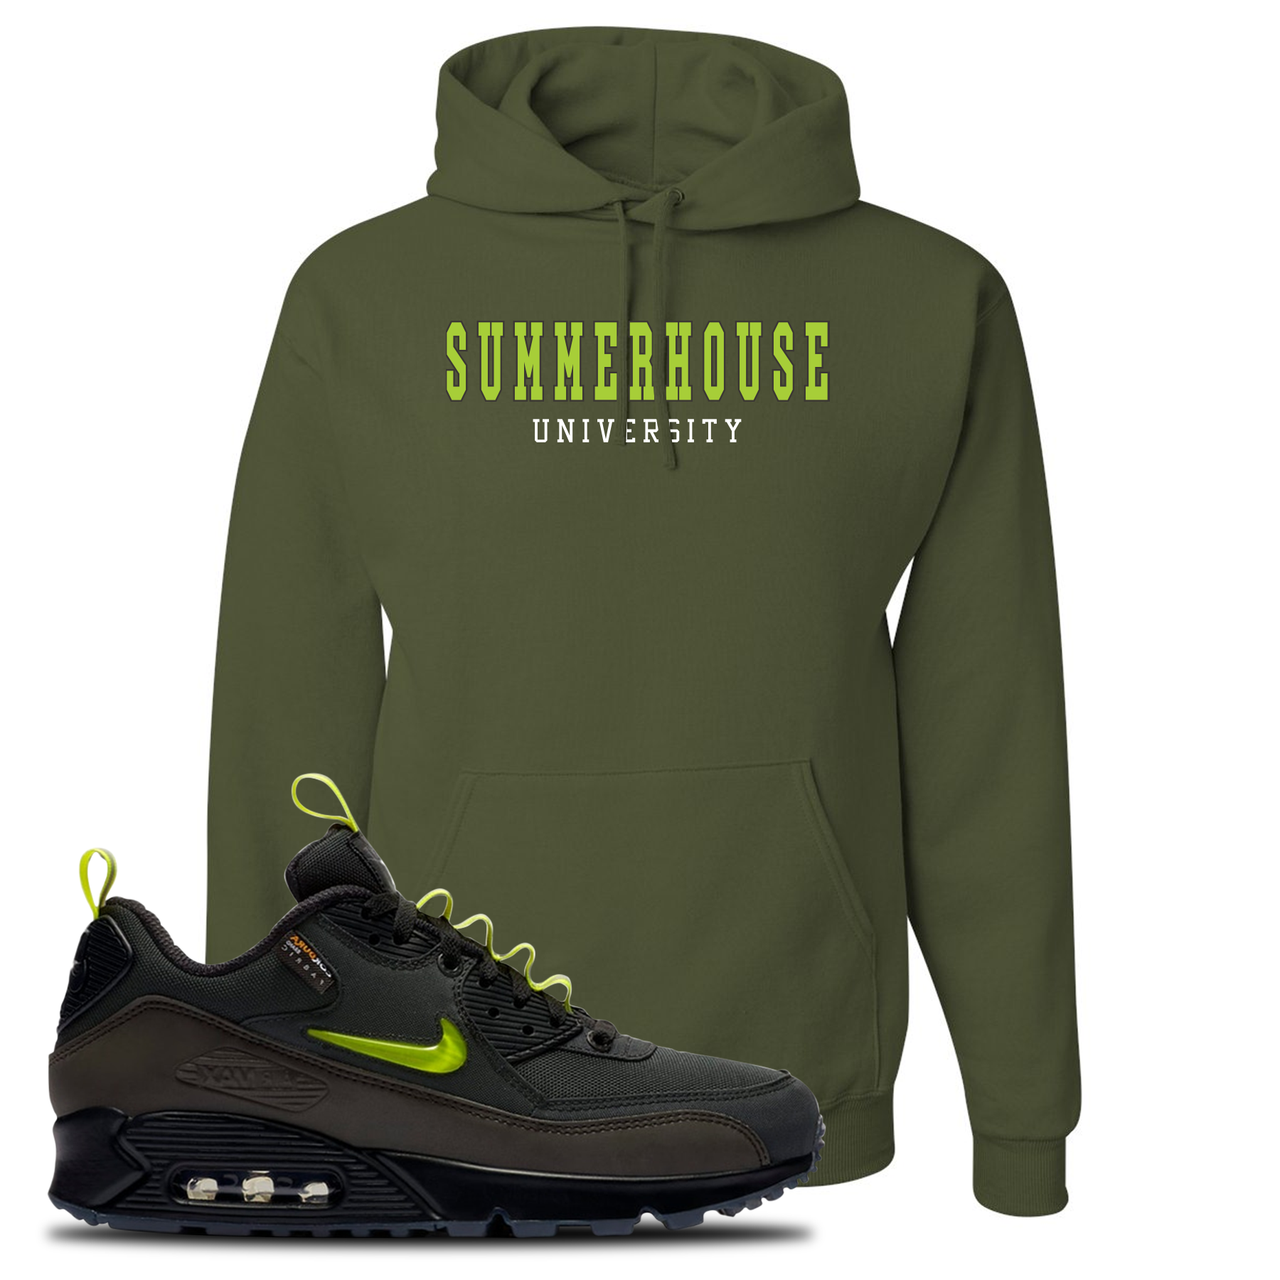 The Basement X Air Max 90 Manchester Summerhouse University Military Green Sneaker Hook Up Pullover Hoodie